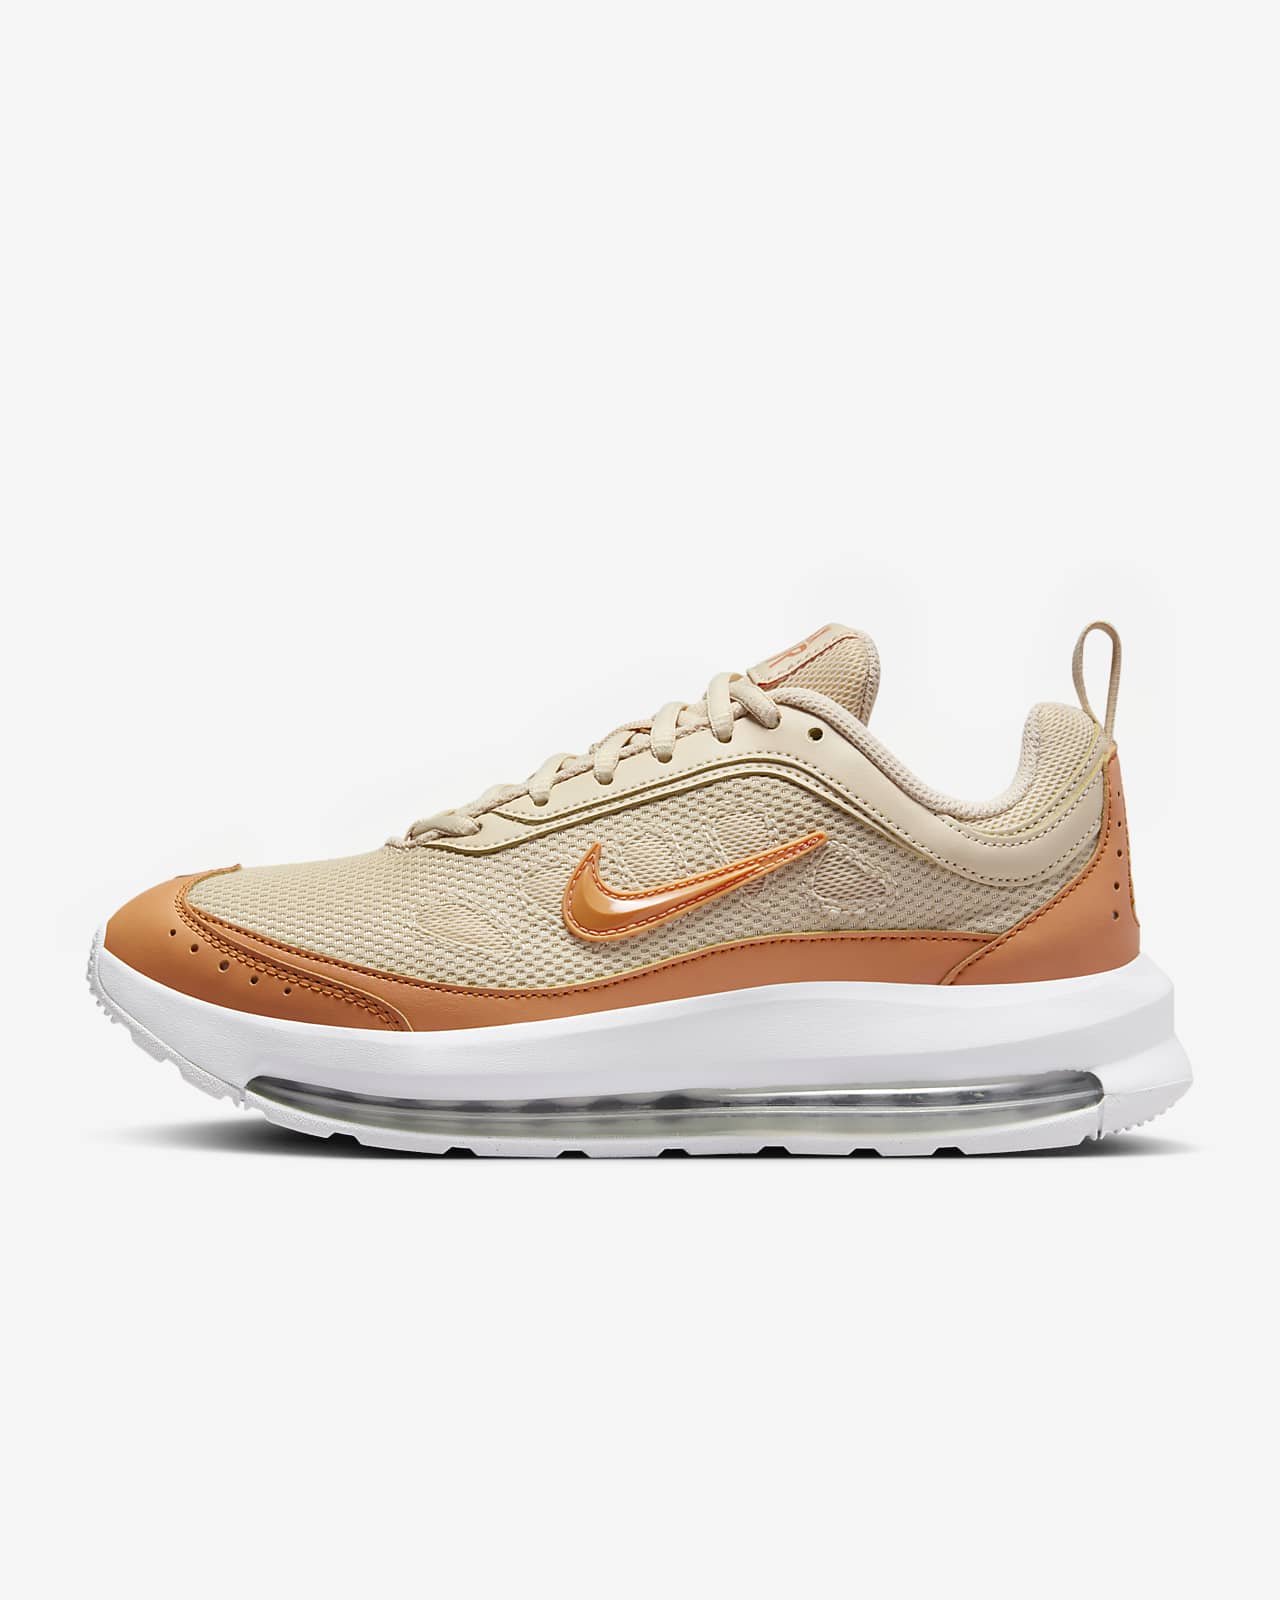 https://static.nike.com/a/images/t_PDP_1280_v1/f_auto,q_auto:eco/317b965c-6eef-4c04-b952-adda8ed4f7d4/air-max-ap-womens-shoe-ZBWzgh.png